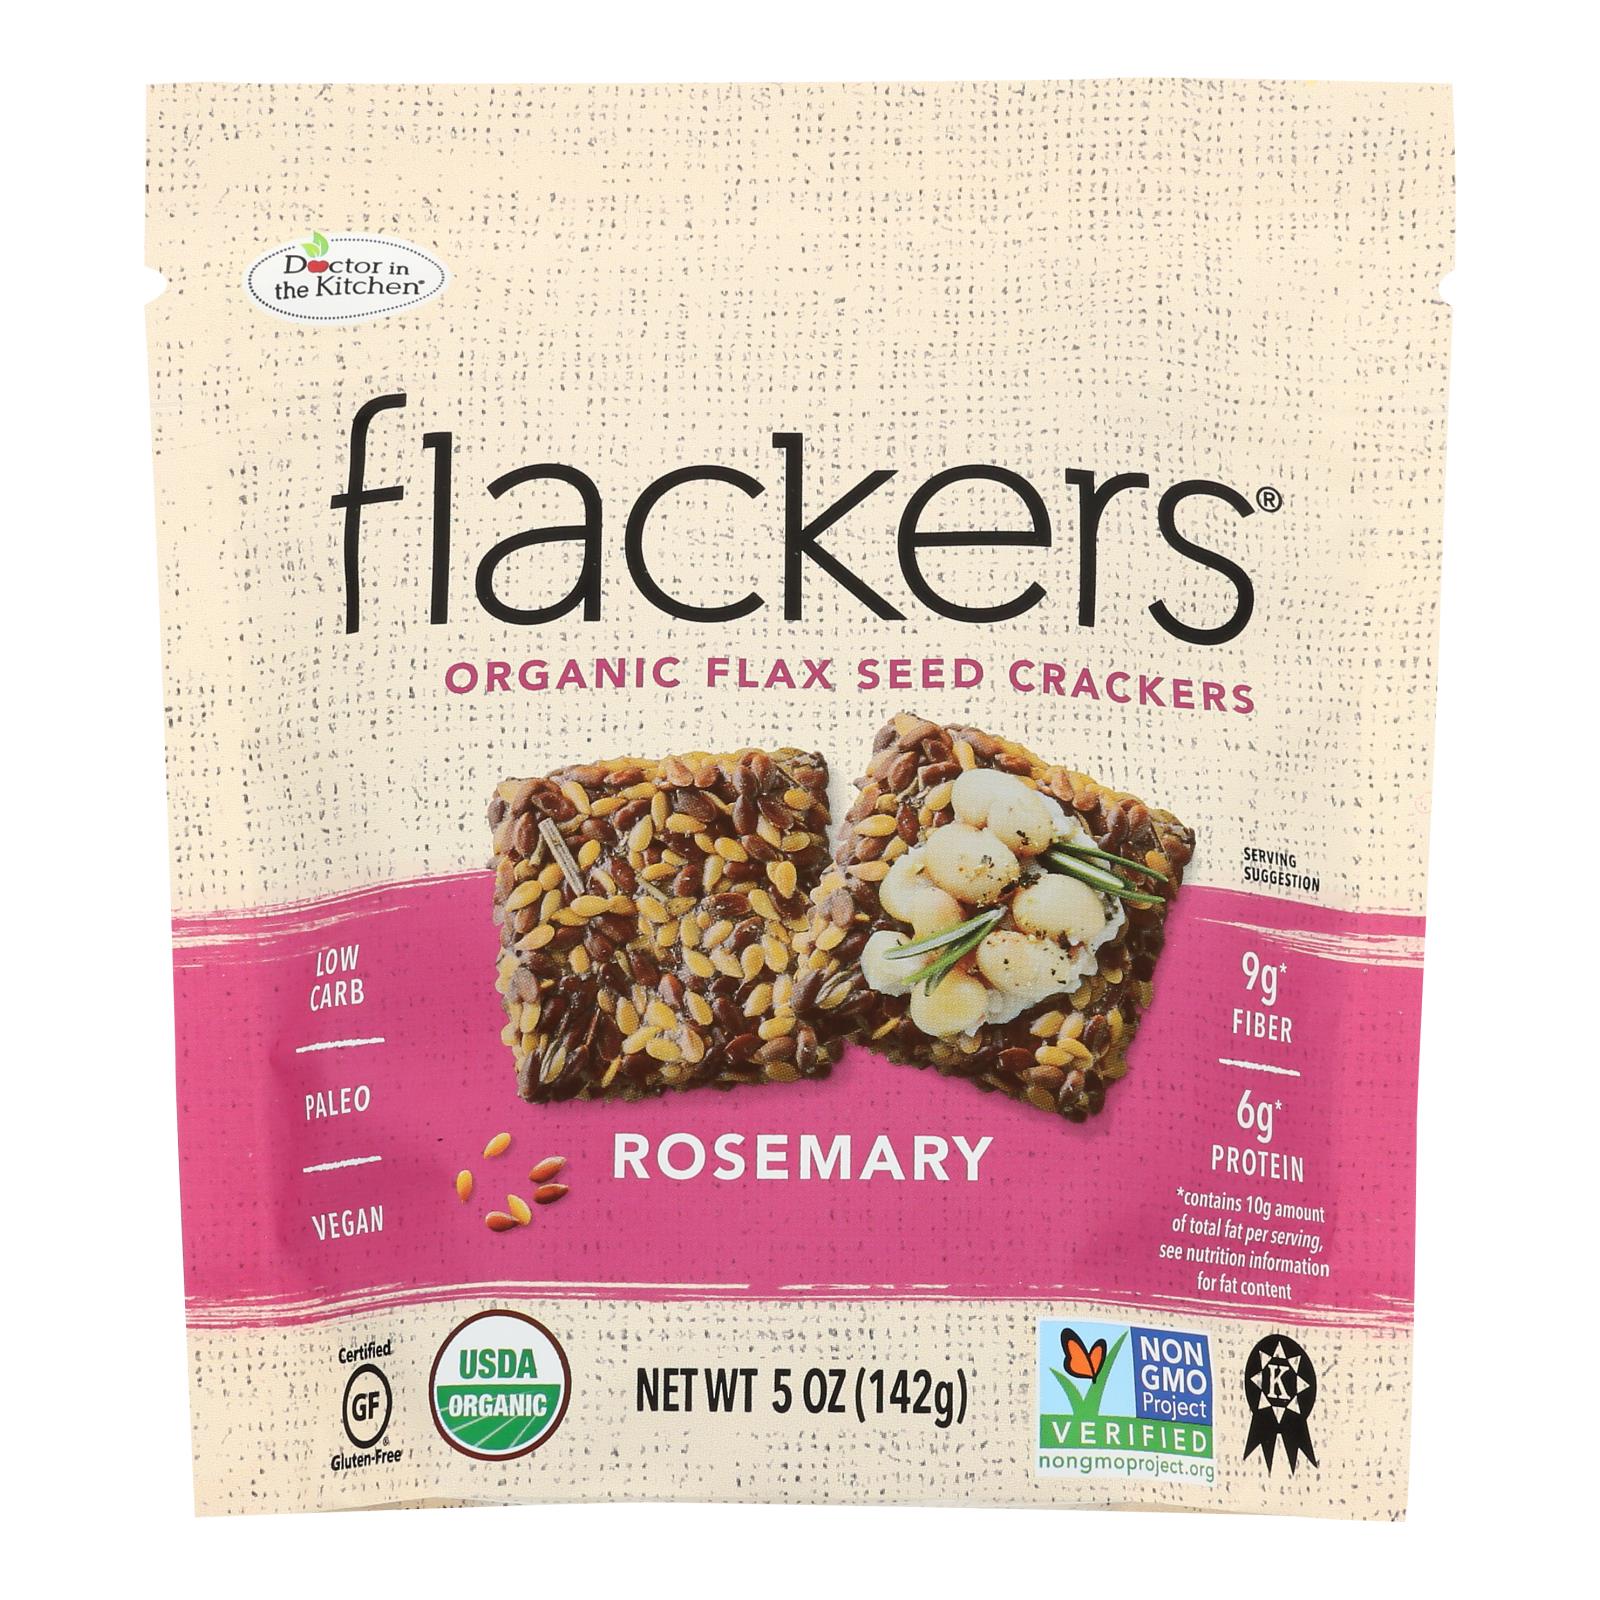 Doctor In The Kitchen - Organic Flax Seed Crackers - Rosemary - 6개 묶음상품 - 5 oz.